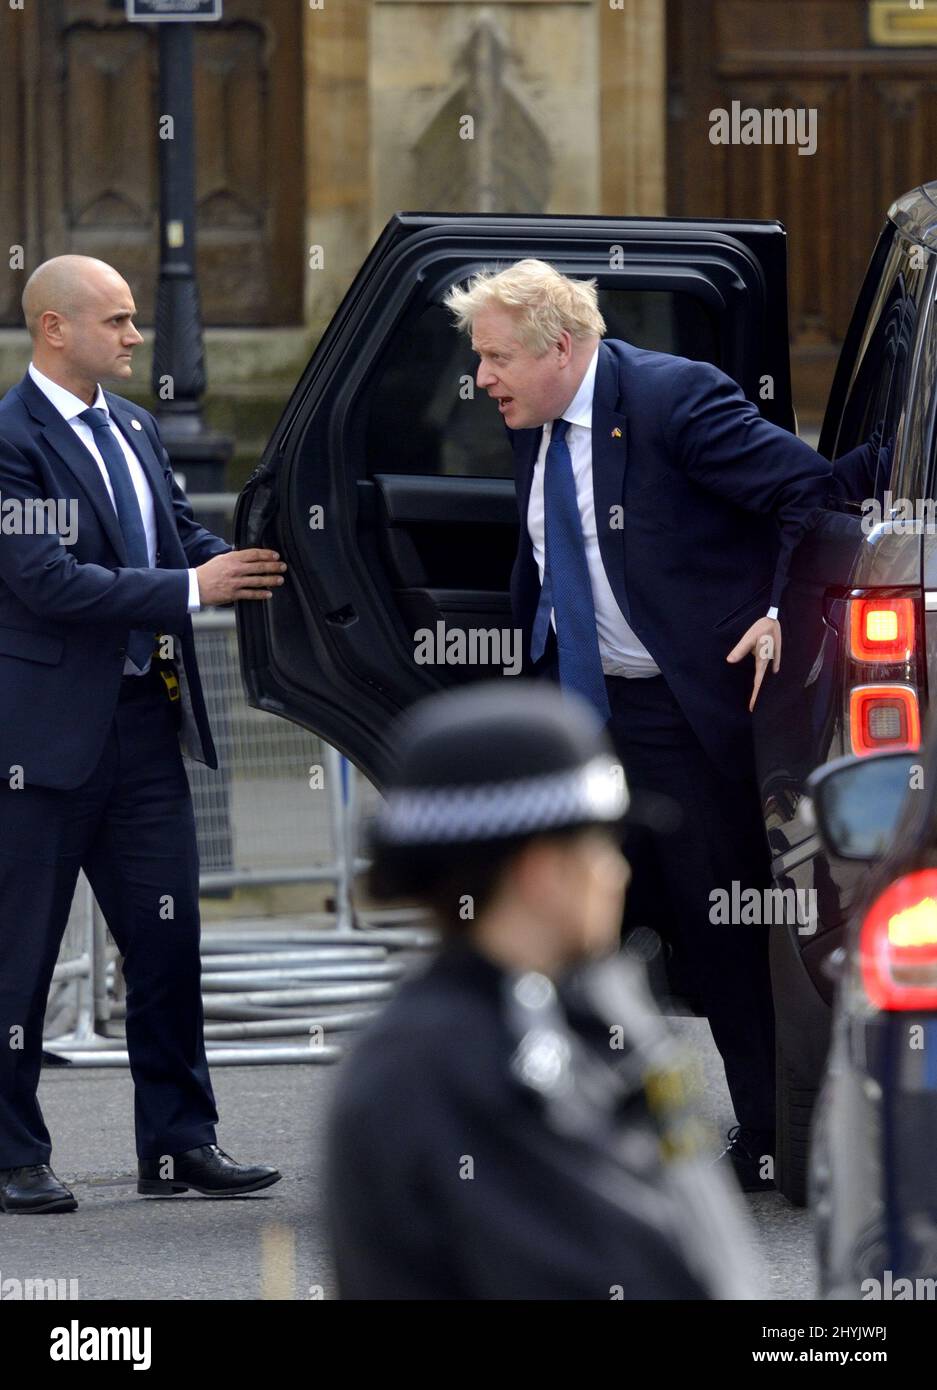 British Prime Minister Boris Johnson arriving at the Commonwealth Service at Westminster Abbey, London, 14th March 2022. Stock Photo